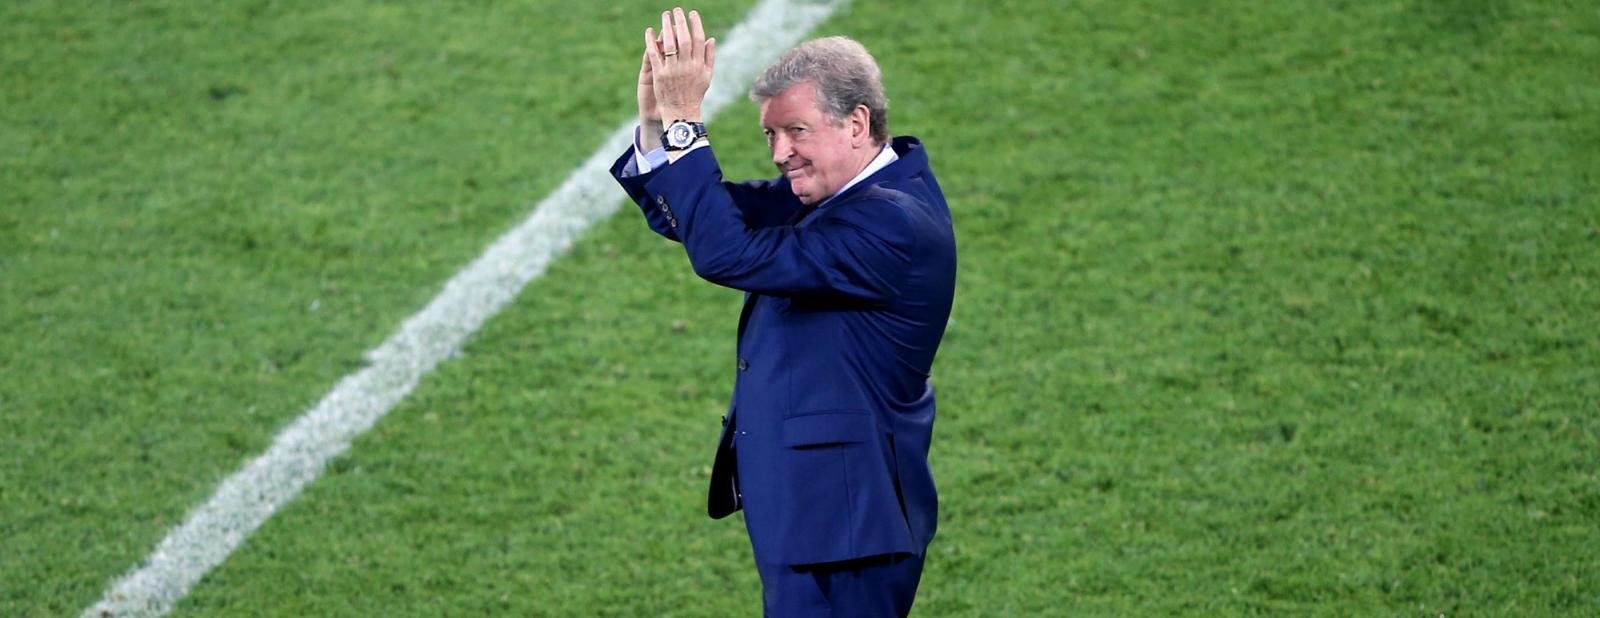 England manager Roy Hodgson resigns following embarrassing defeat to Iceland